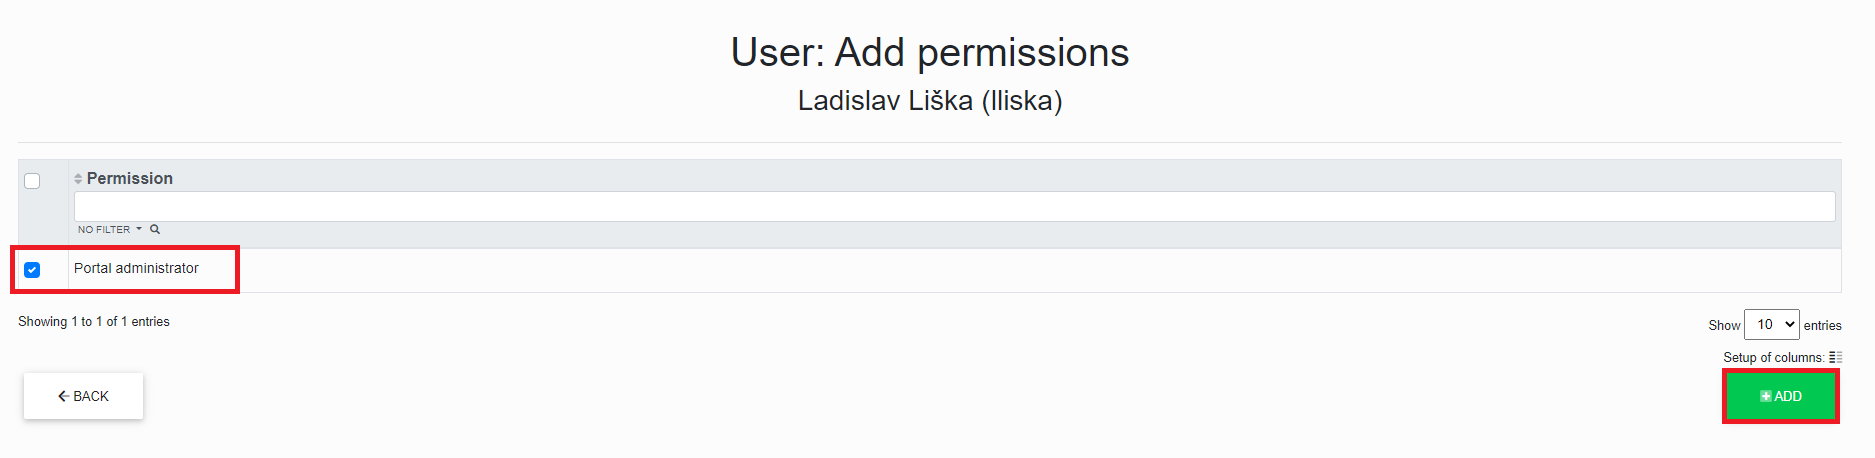 Permissions user add 1.png